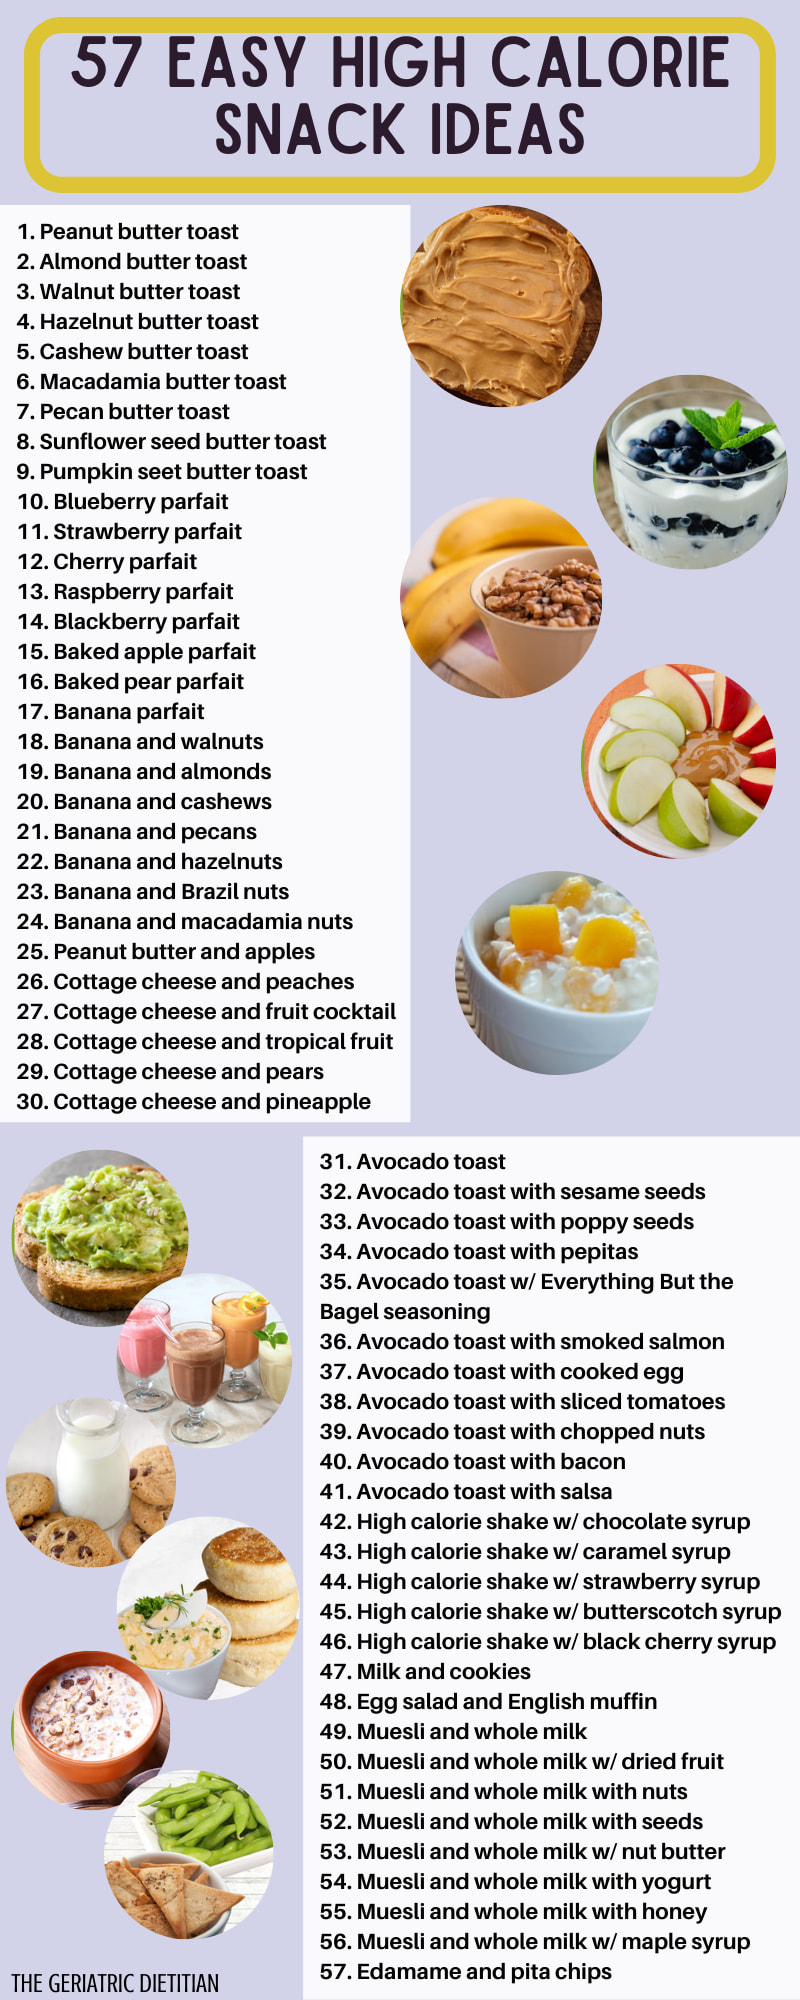 Healthy High Calorie Foods for Underweight Kids